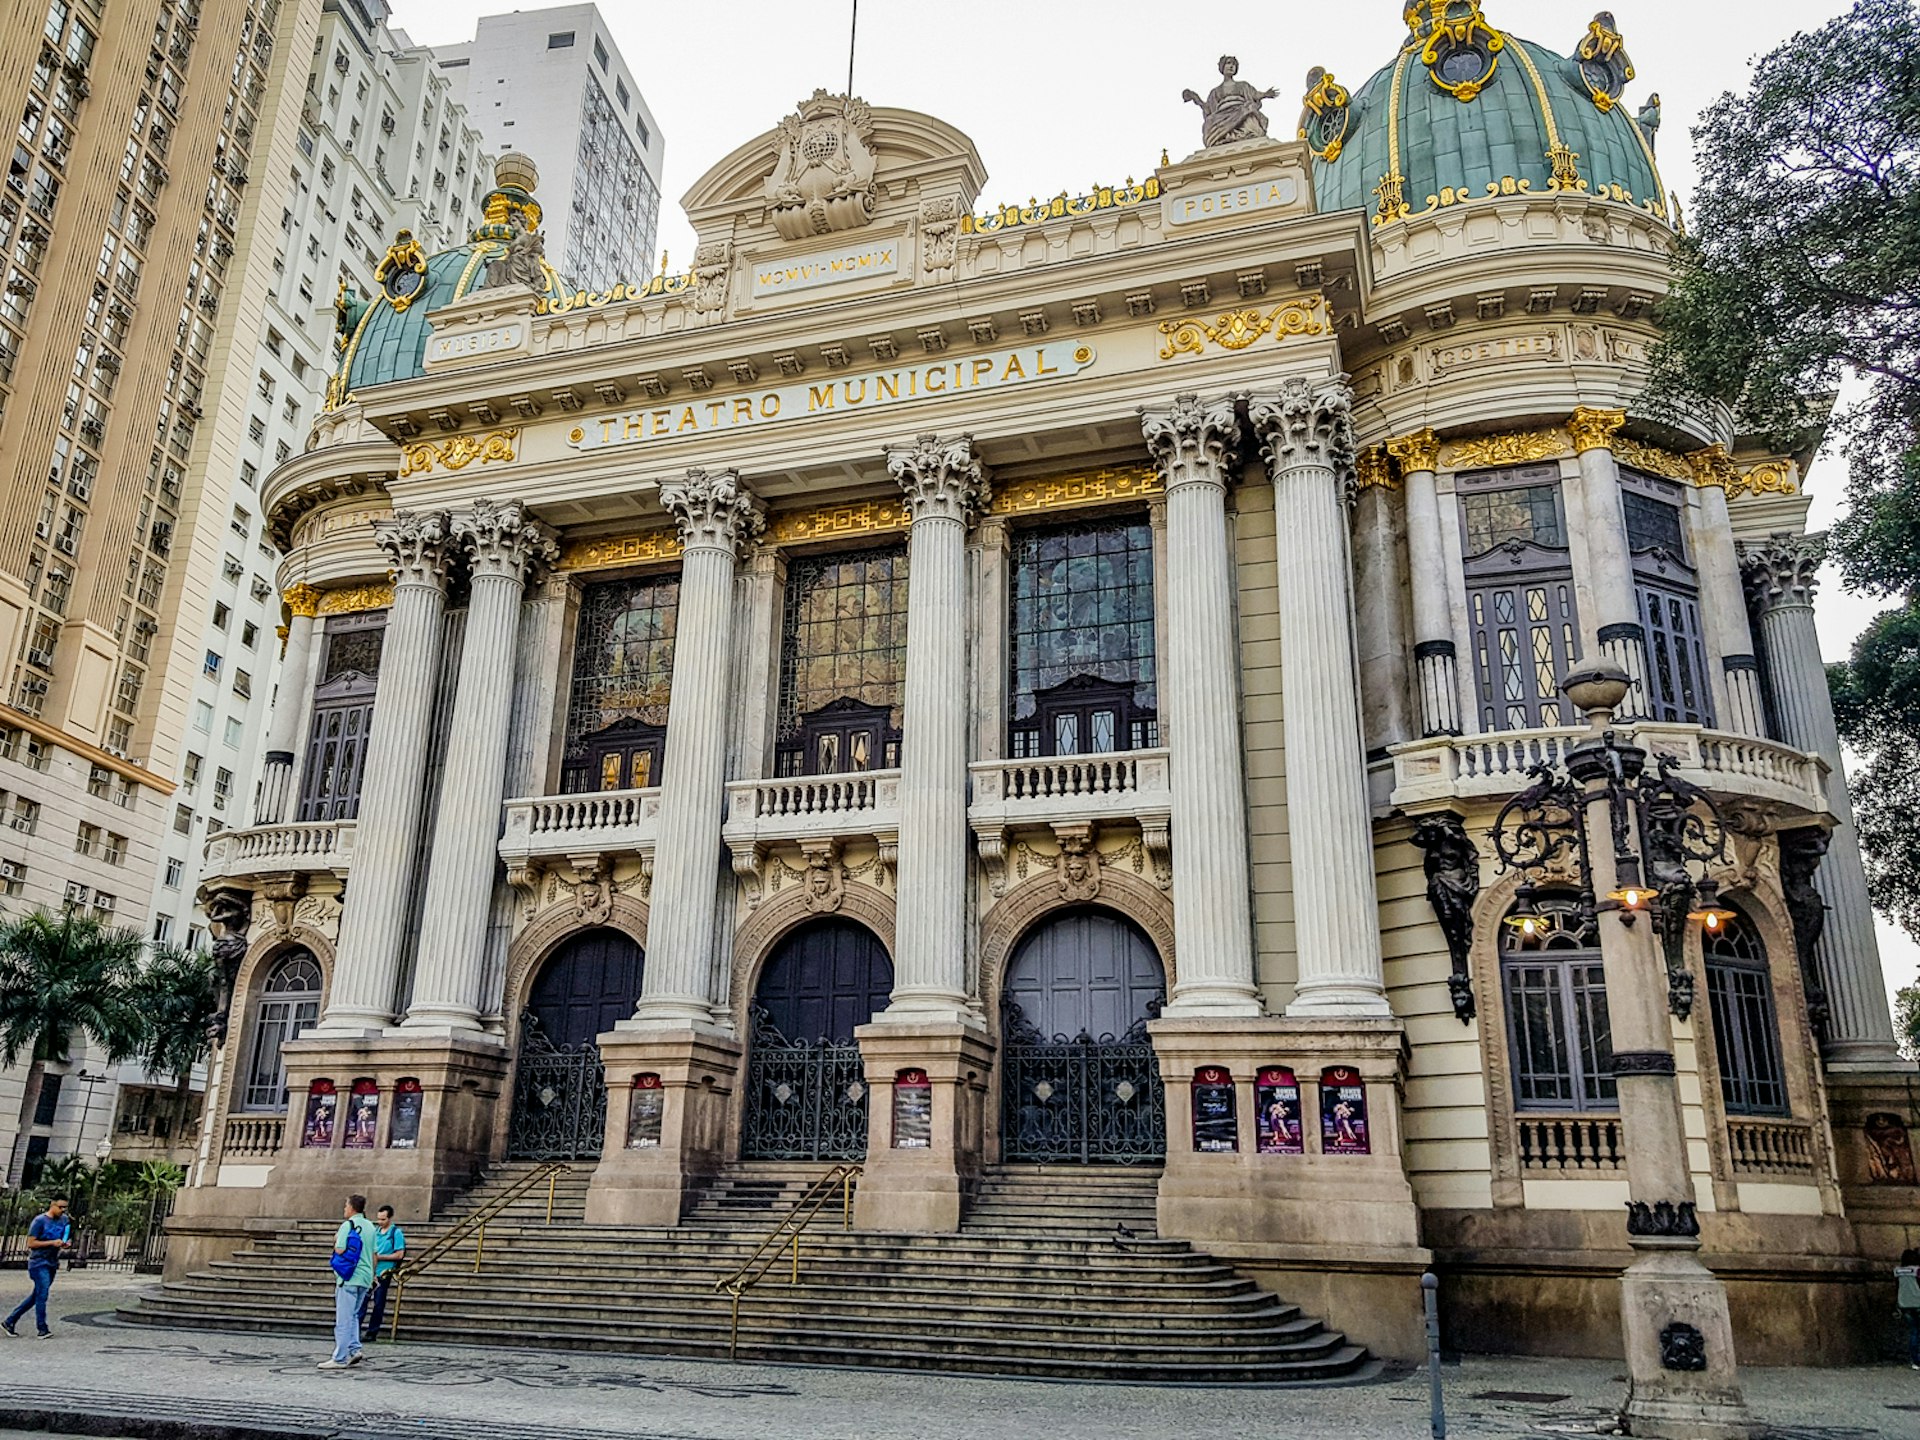 An image of the beaux-arts exterior of Rio's Theatro Municipal © Tom Le Mesurier / Lonely Planet